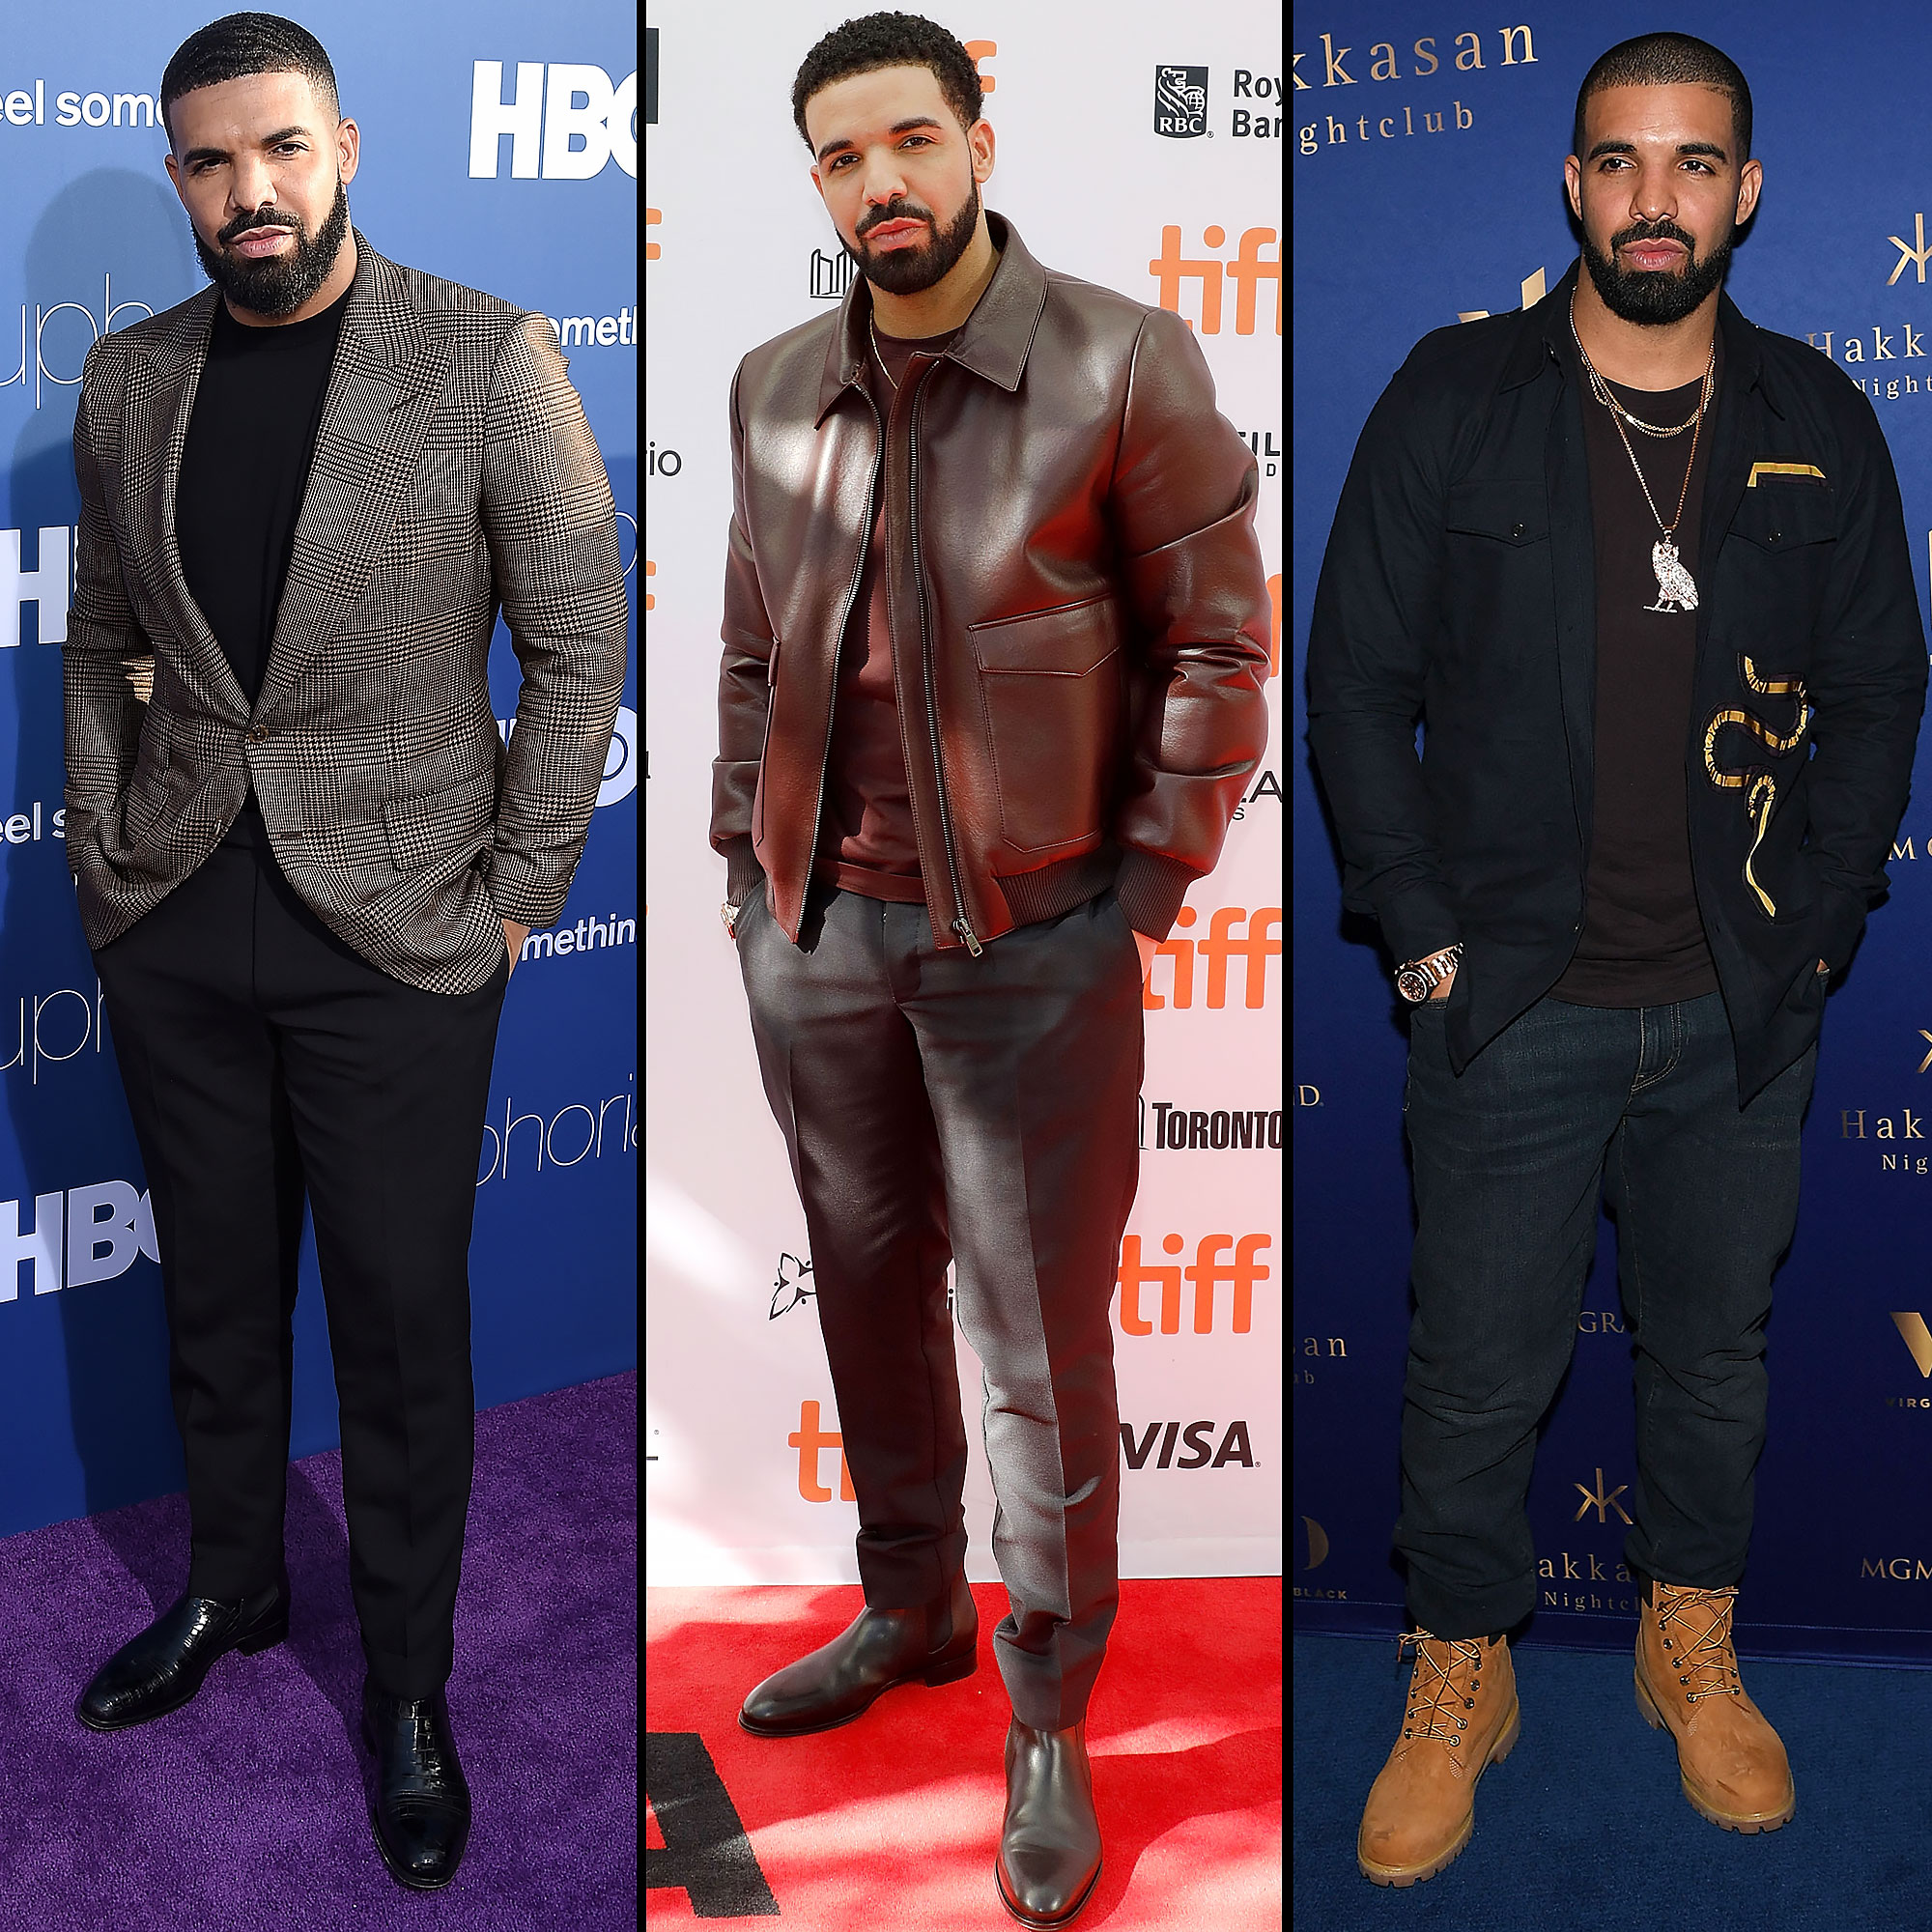 How To Purchase Drake's New Louis Vuitton Denim Jacket - The